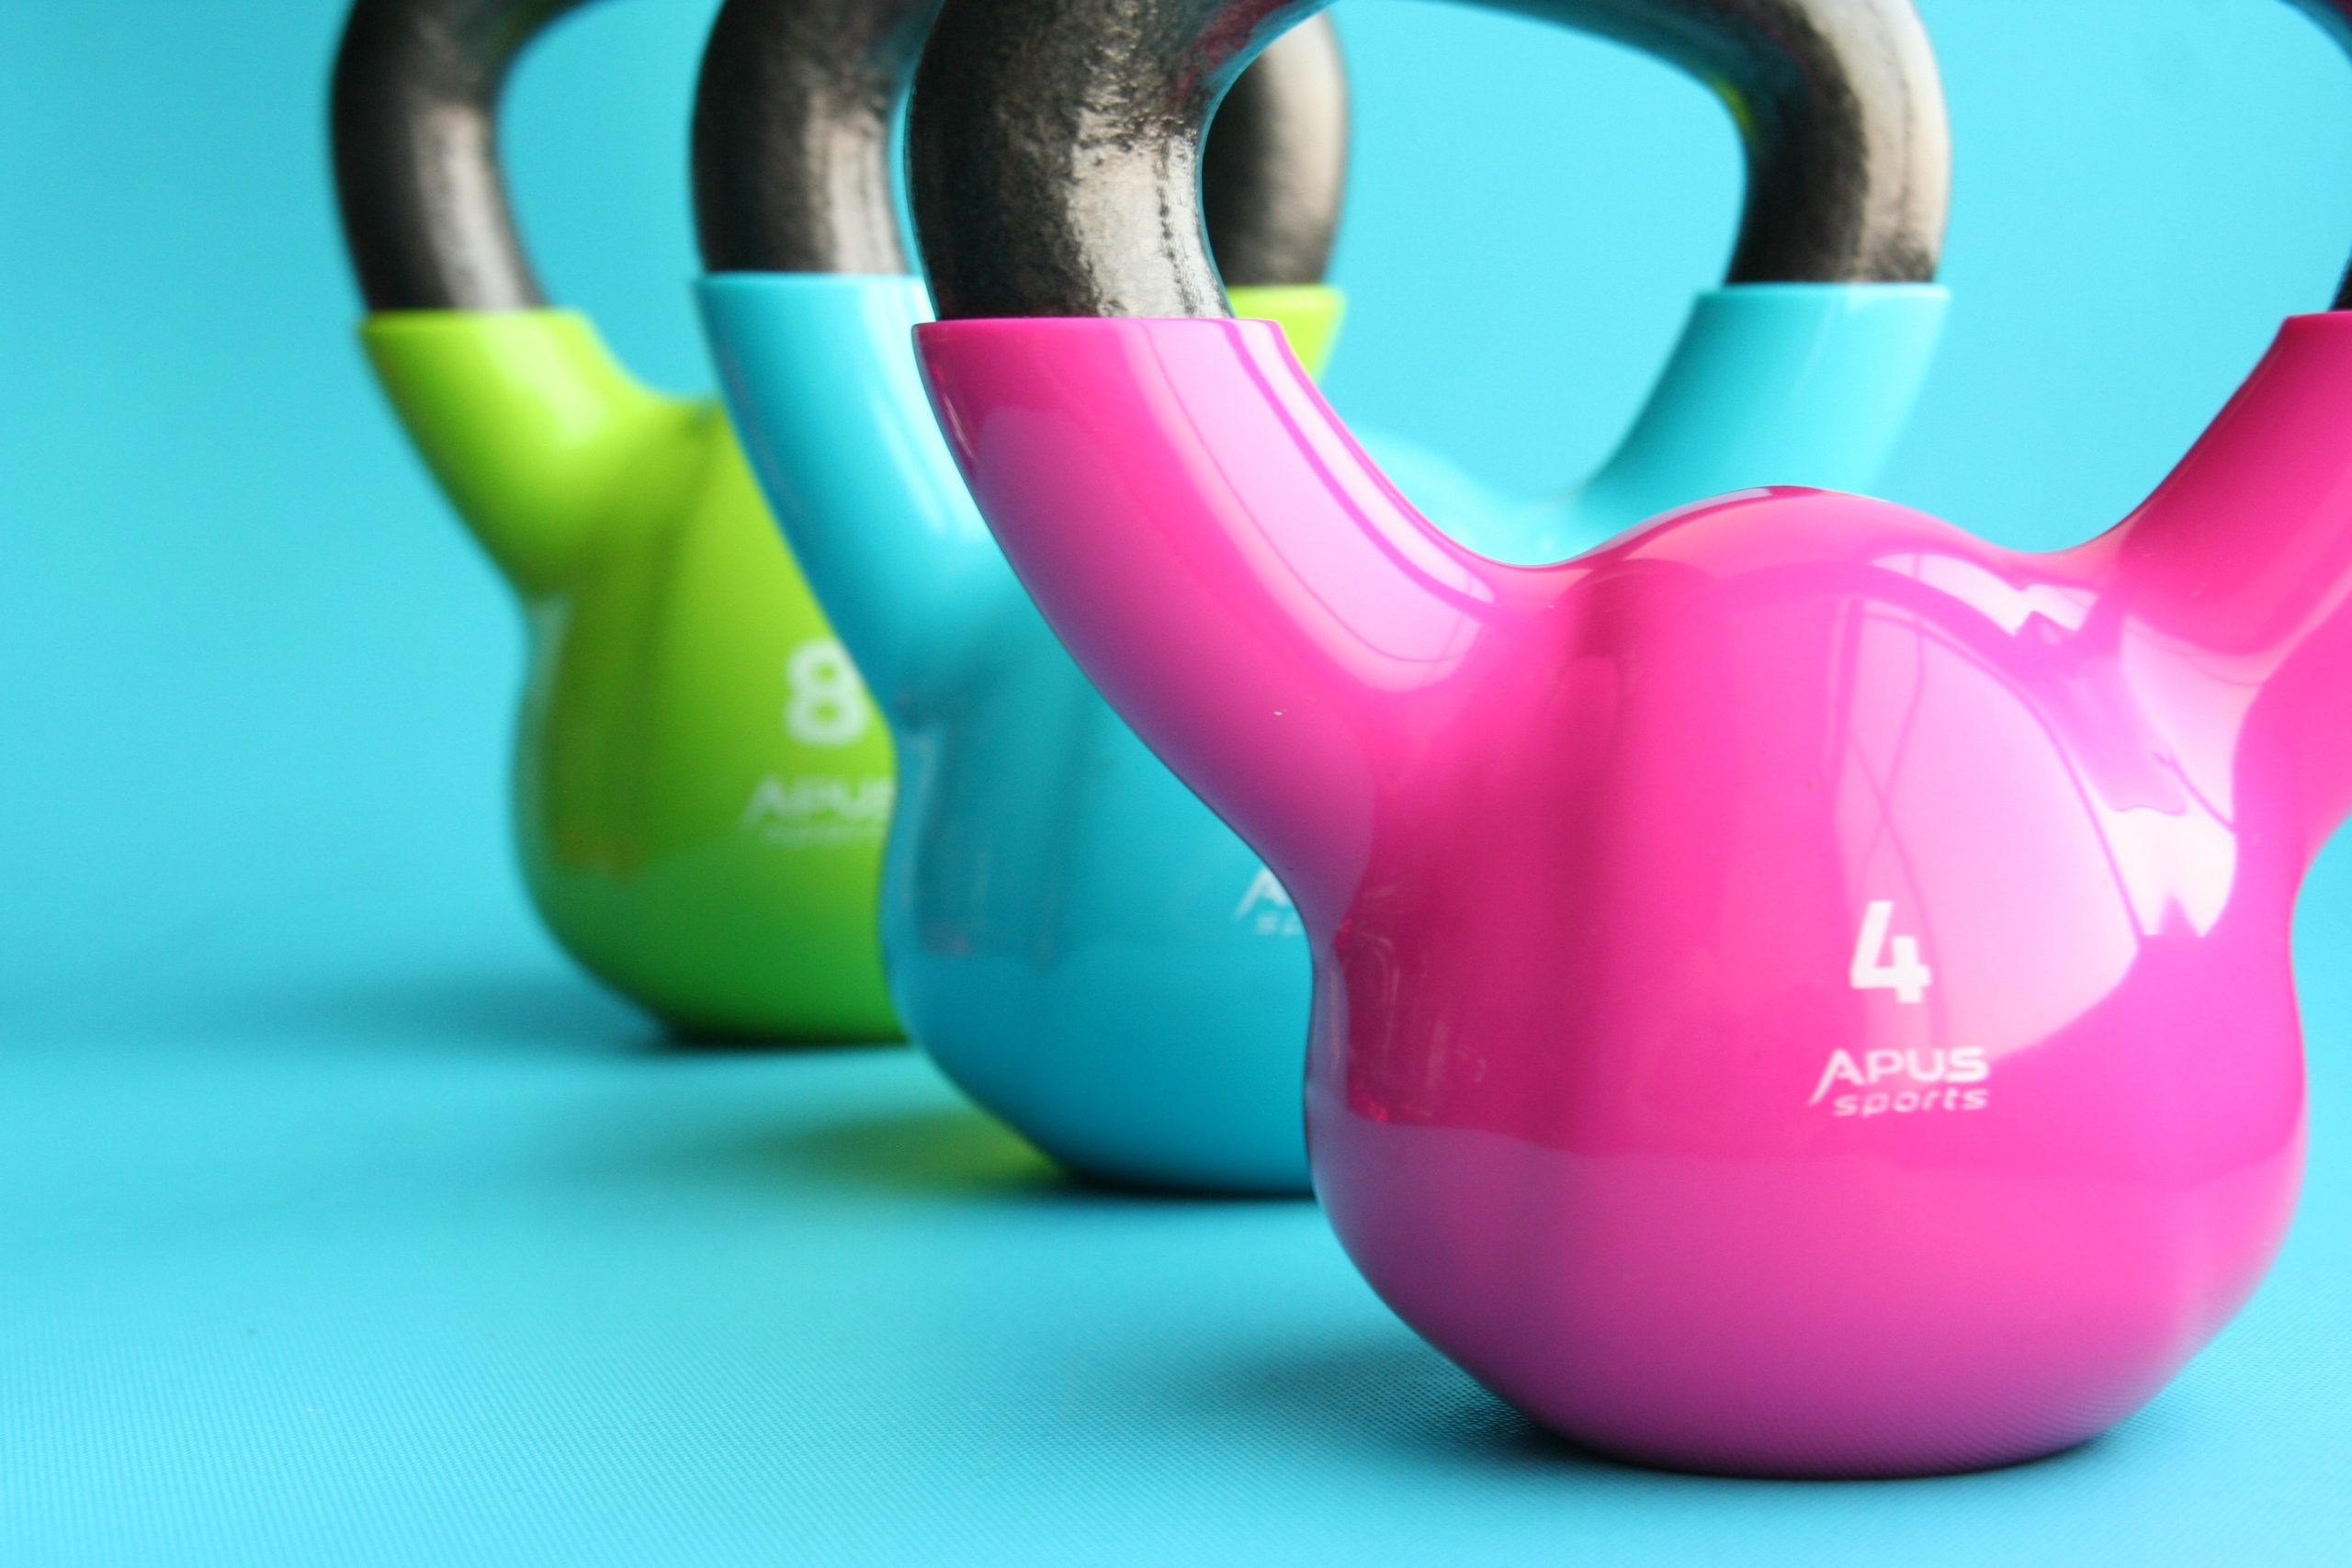 kettlebells in pink, light blue, and lime green